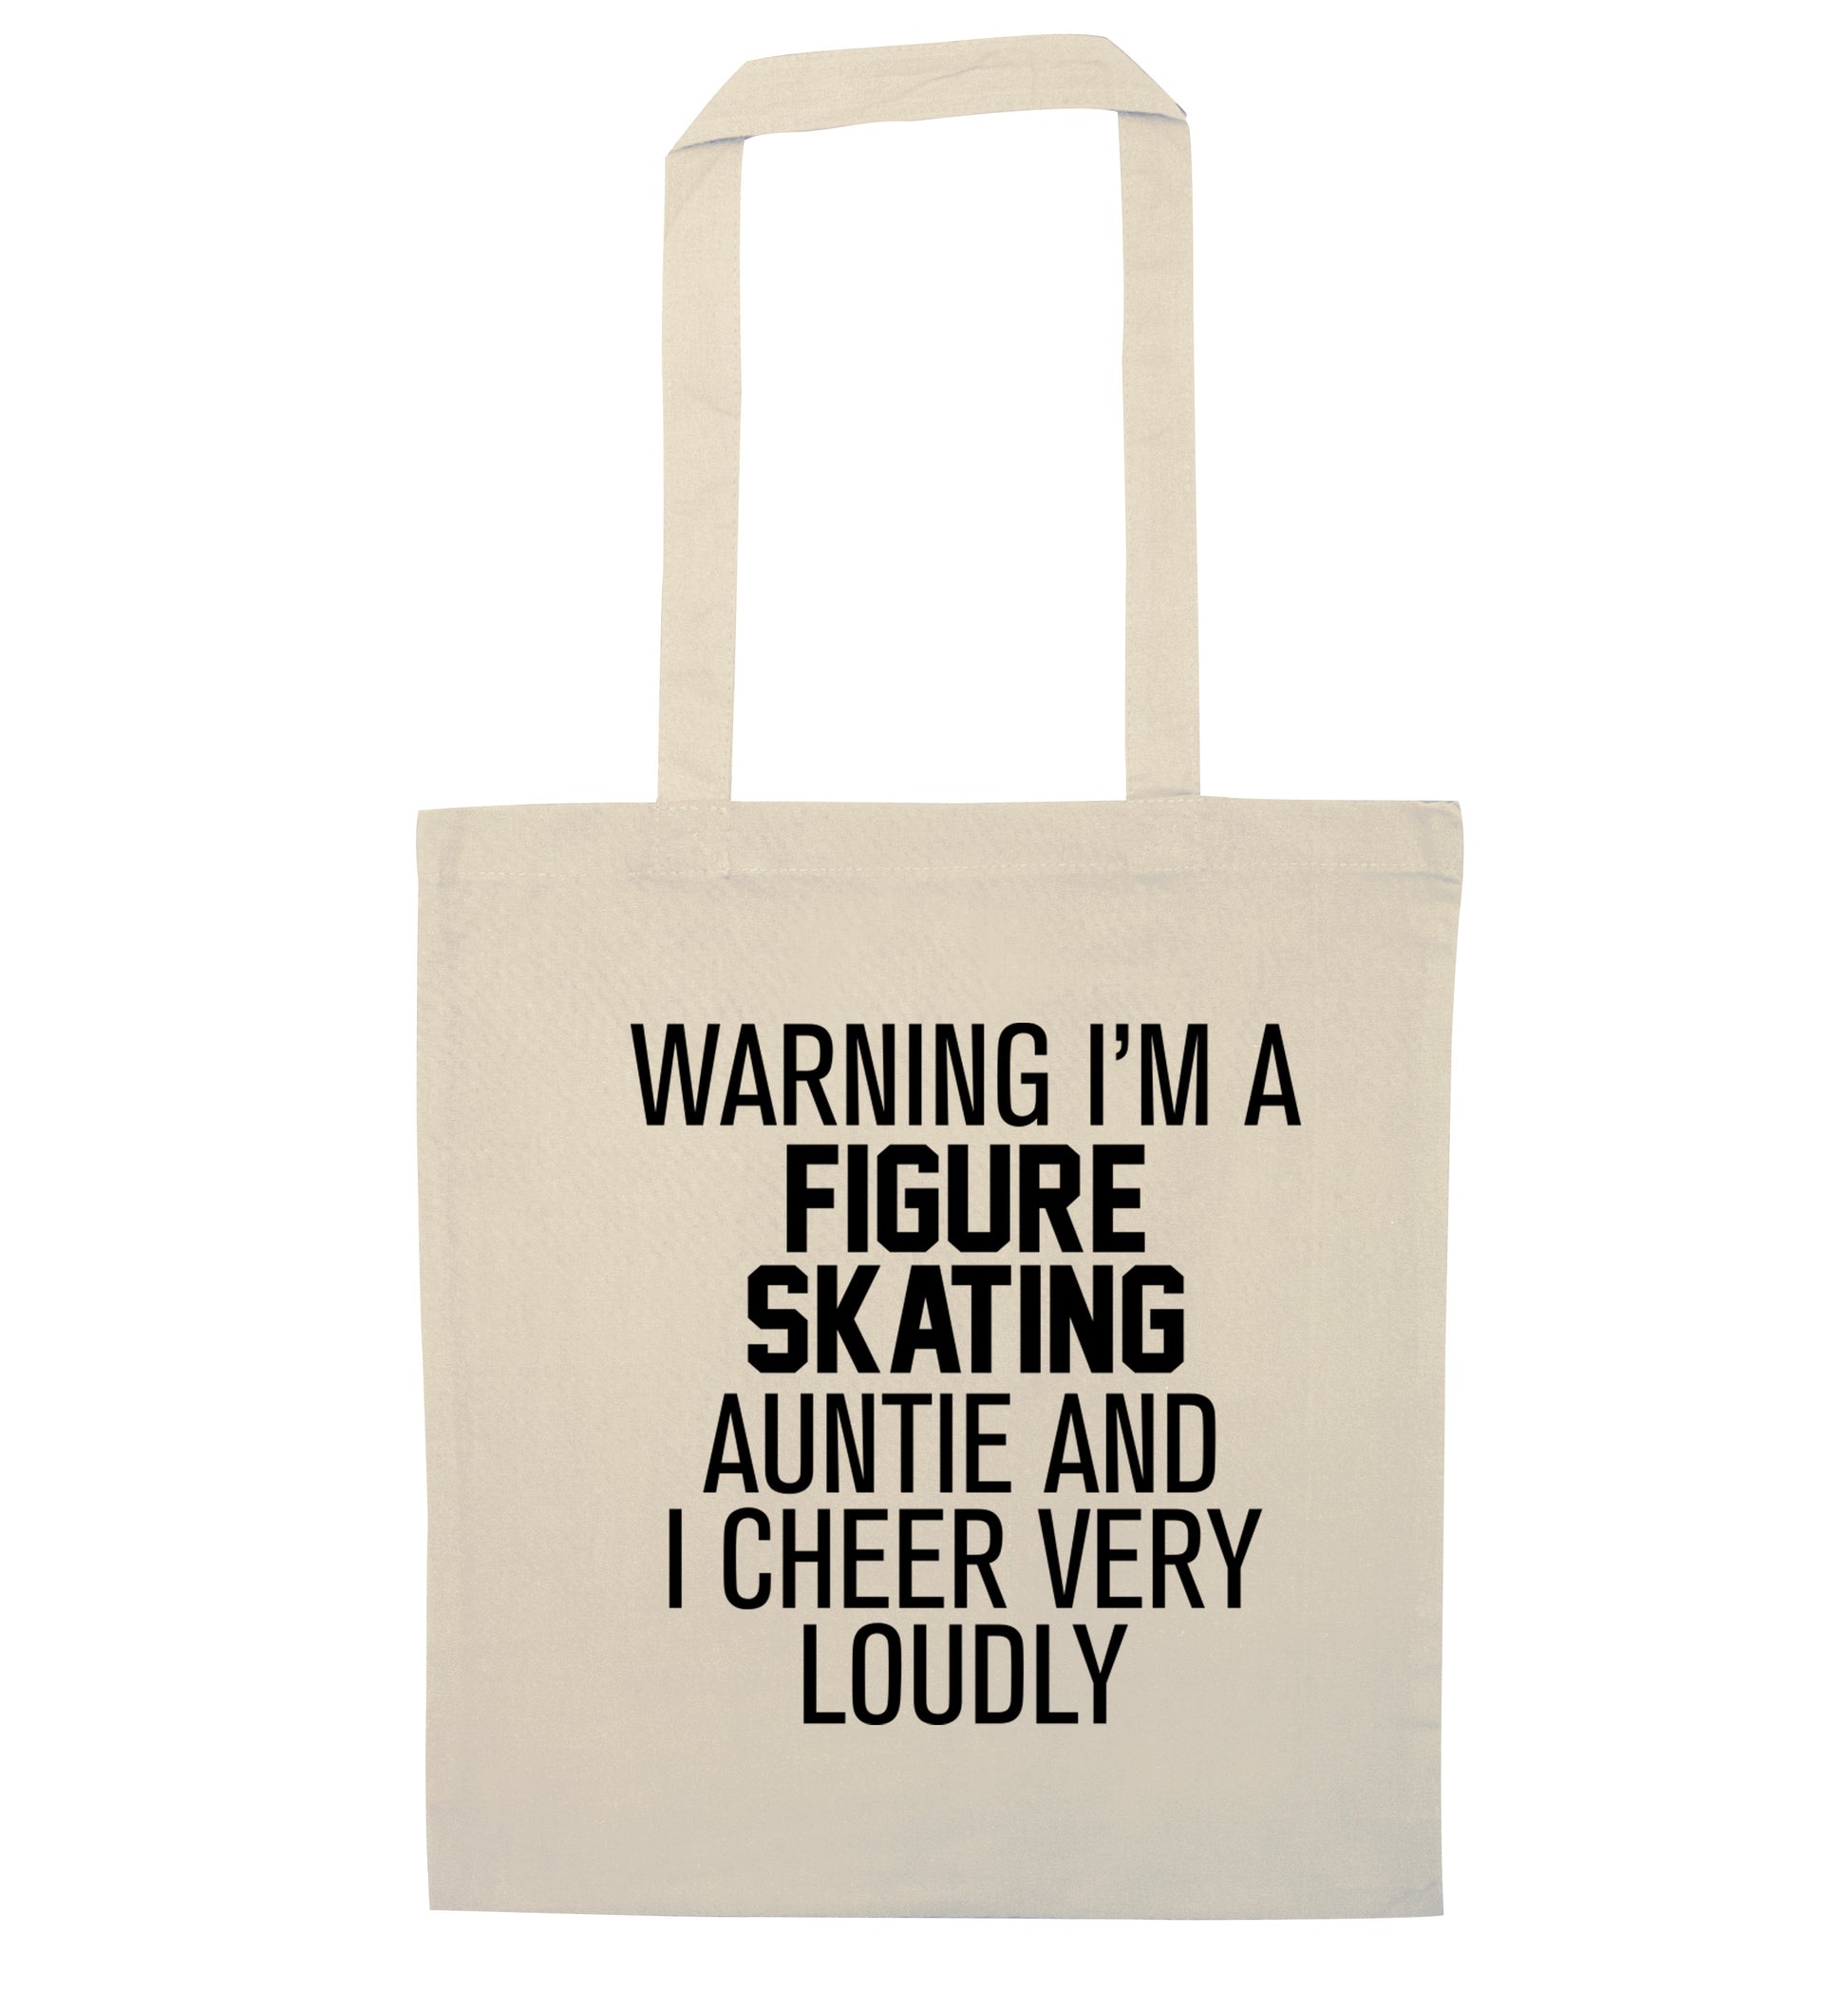 Warning I'm a figure skating auntie and I cheer very loudly natural tote bag